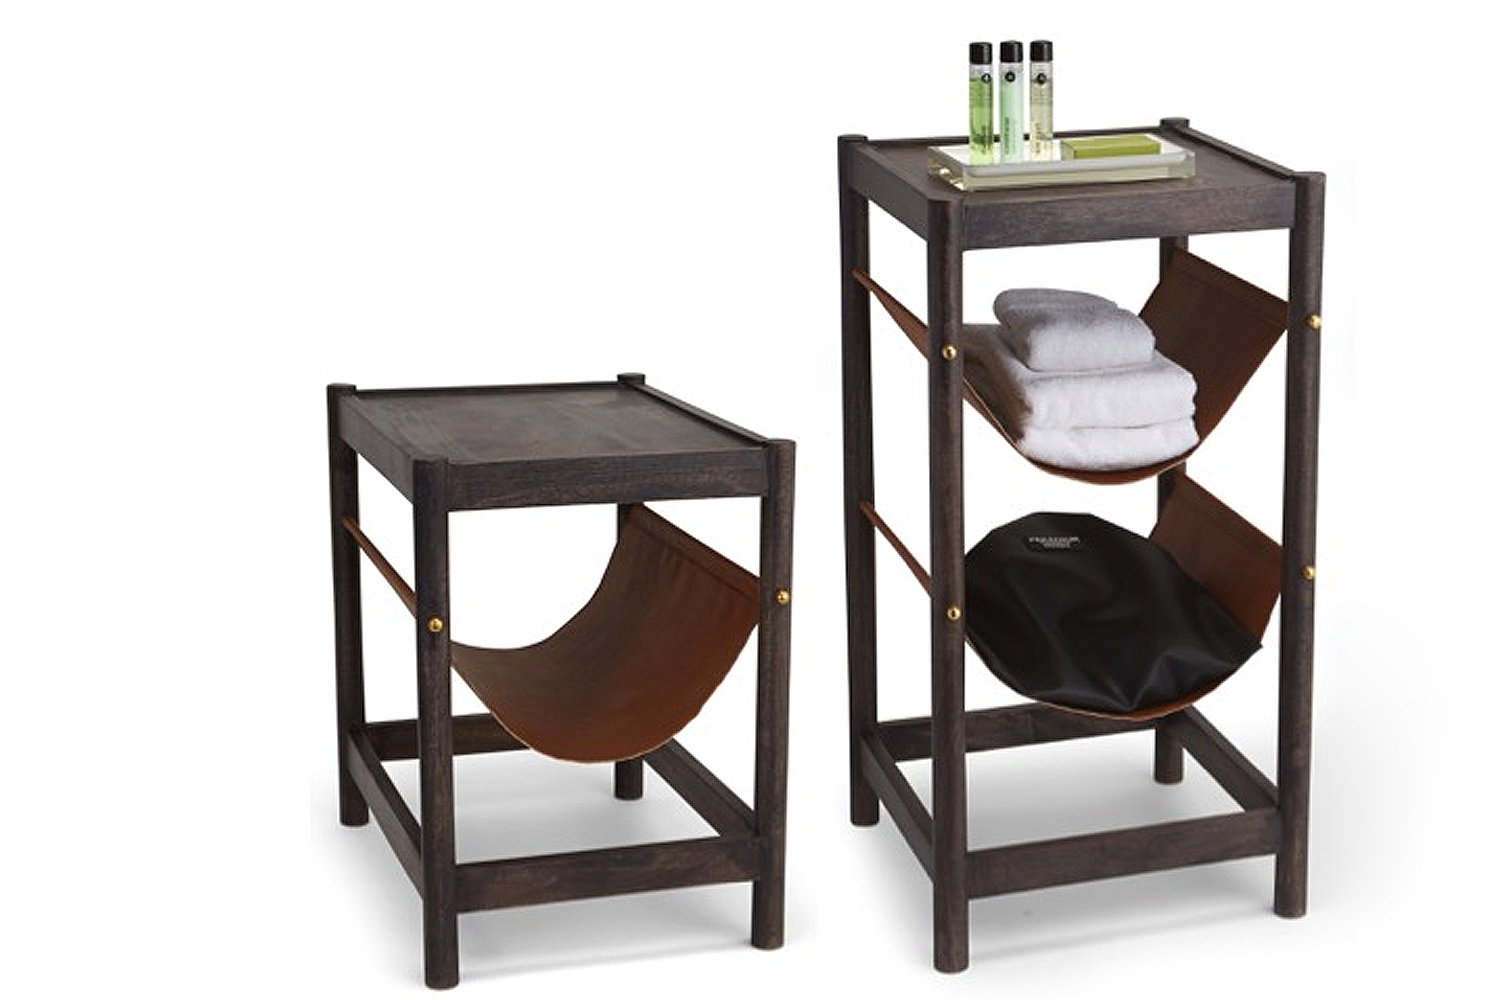 Introducing the Sling Fling table and the Sling Fling Tall new products from Paradigm Trends 